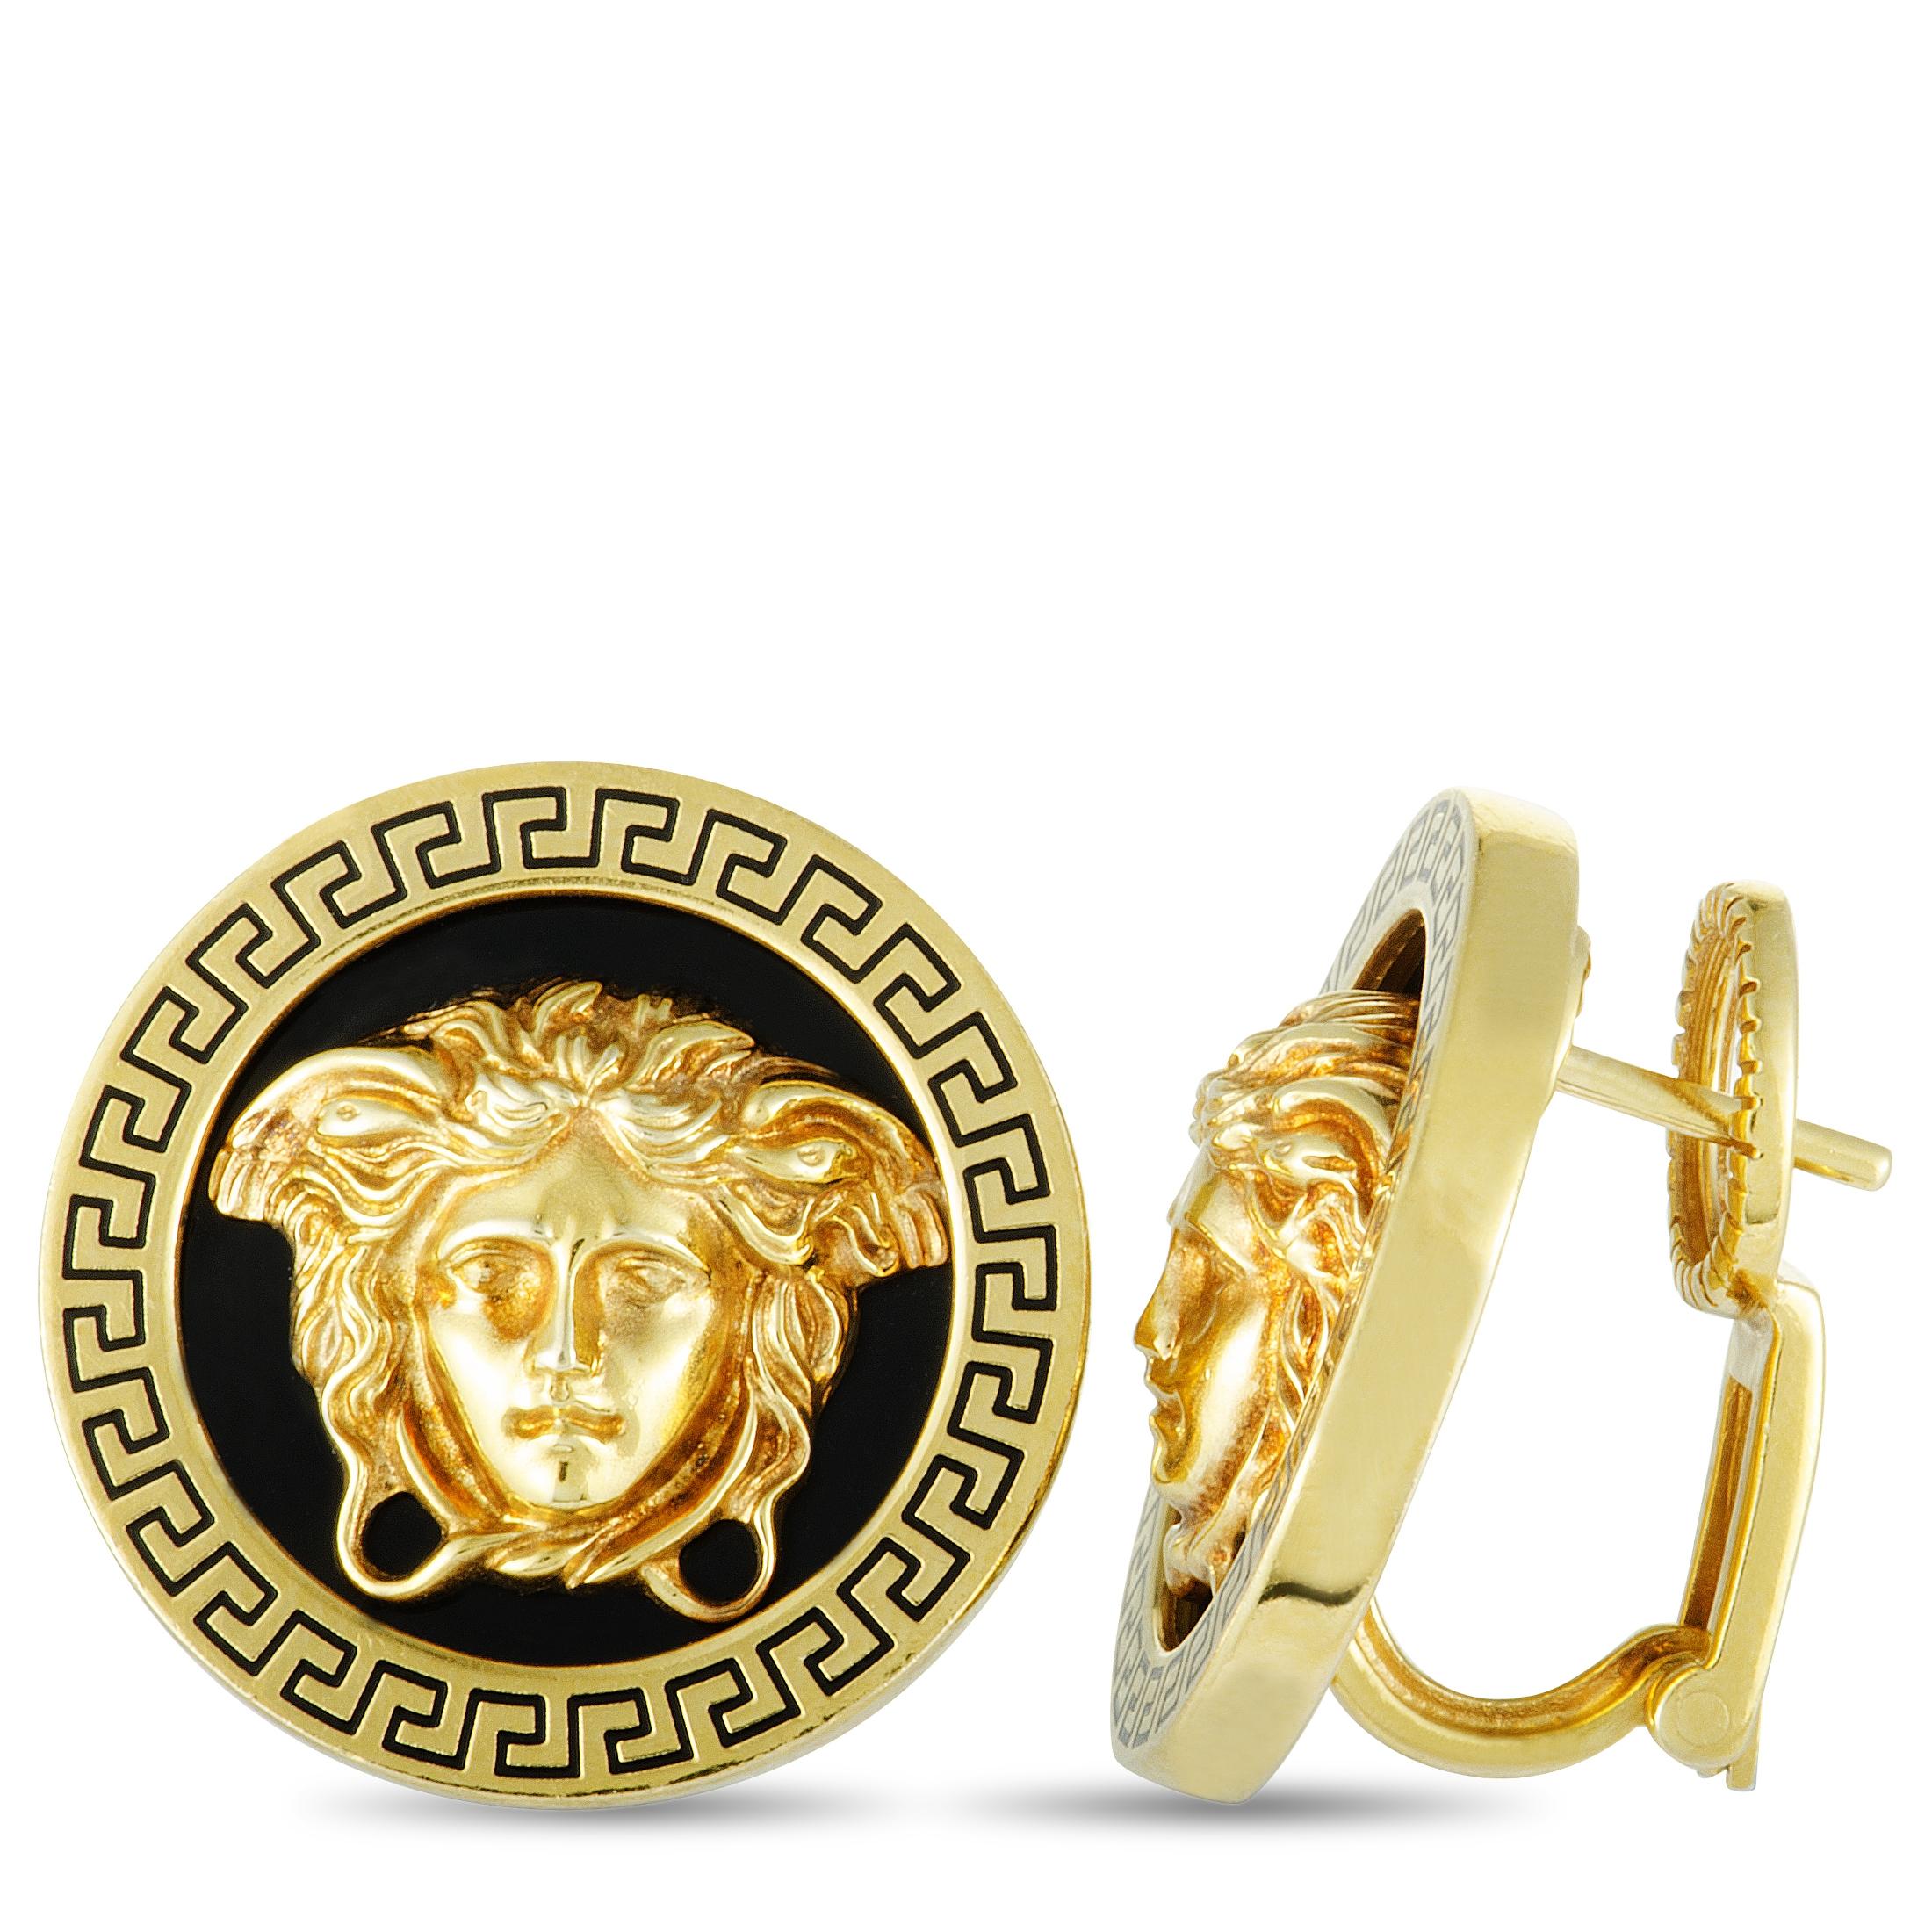 Embellish your ensembles in a most compellingly fashionable manner with these eye-catching Versace earrings that boast the brand’s famous design motifs, offering a look that is as memorable as it is iconic. The earrings are made of luxurious 18K